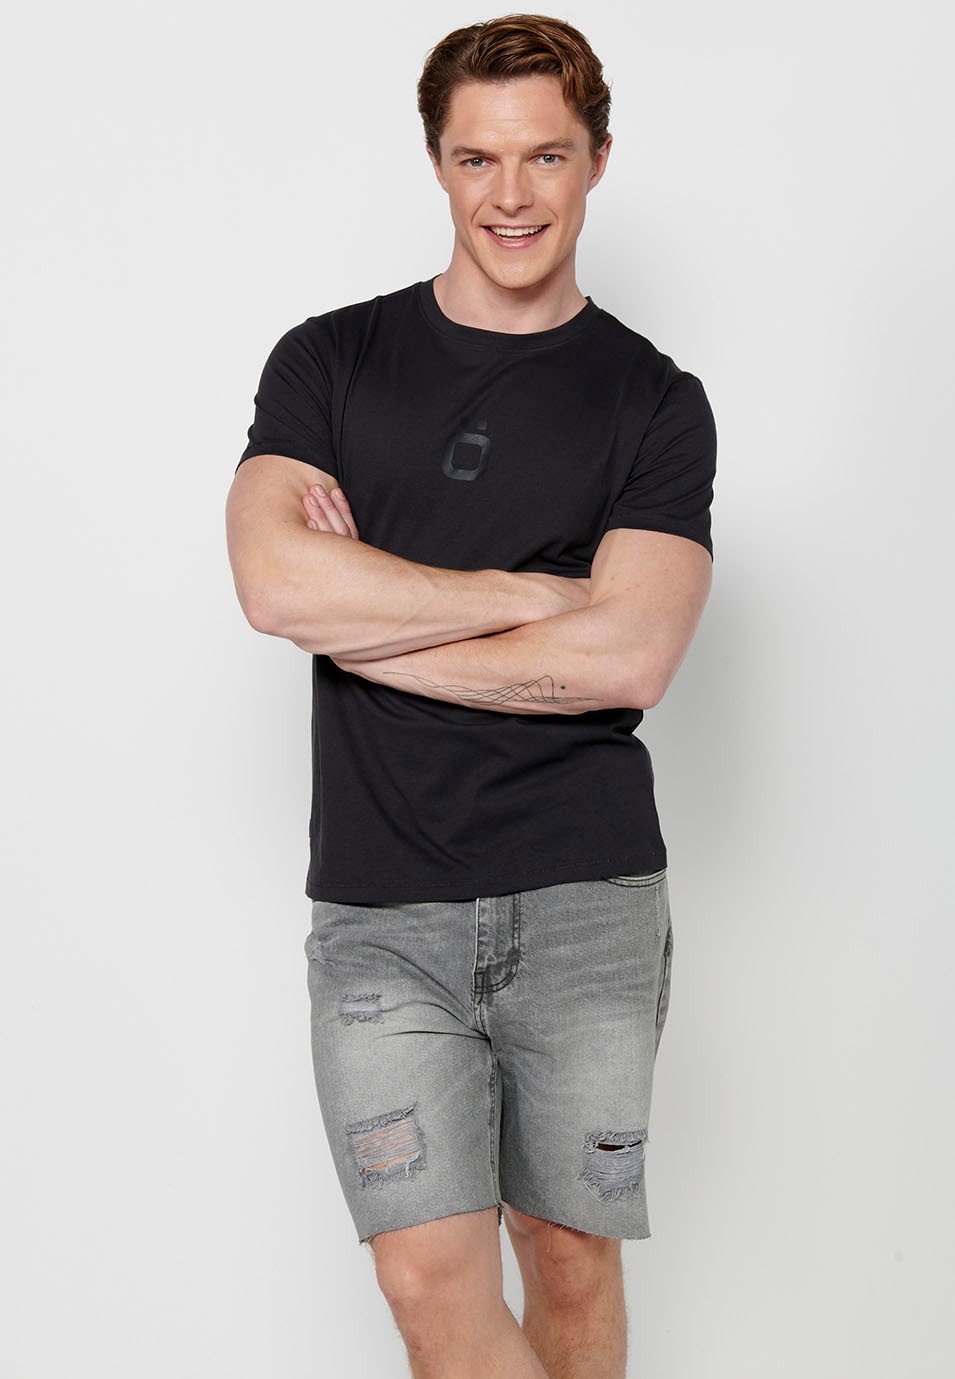 Short sleeve round neck t-shirt with front logo in black for men